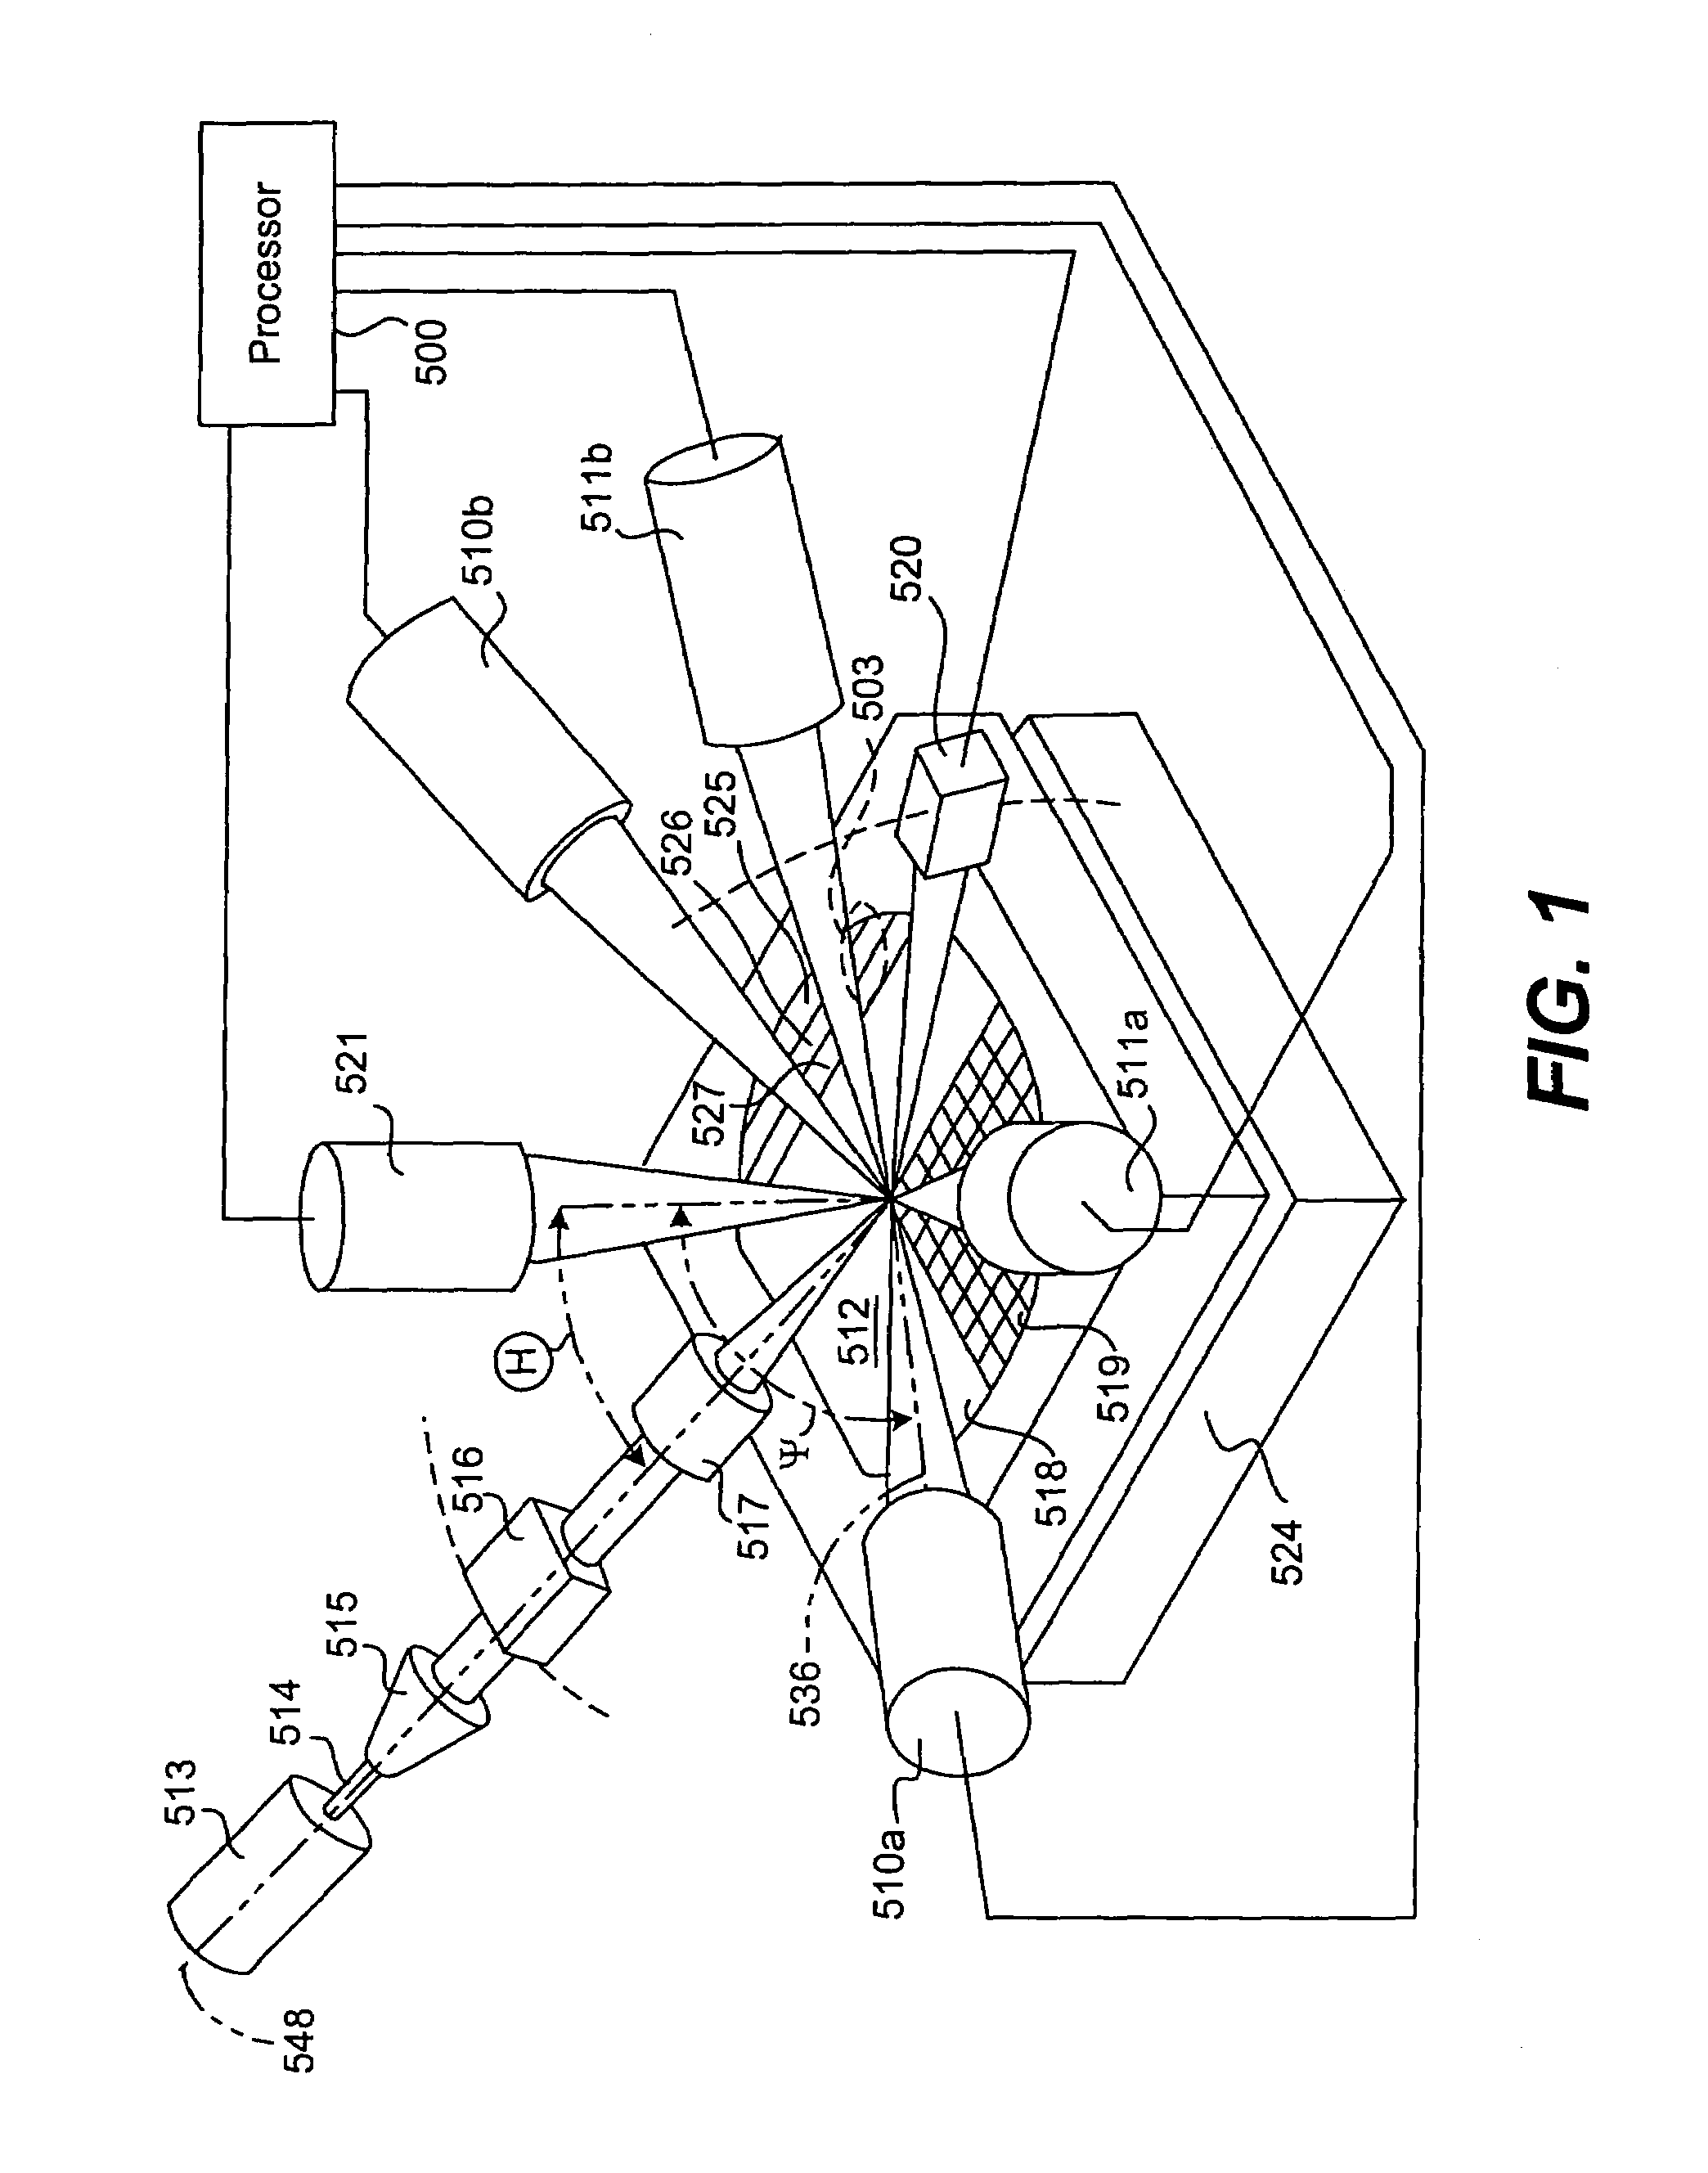 Apparatus and methods for optically inspecting a sample for anomalies